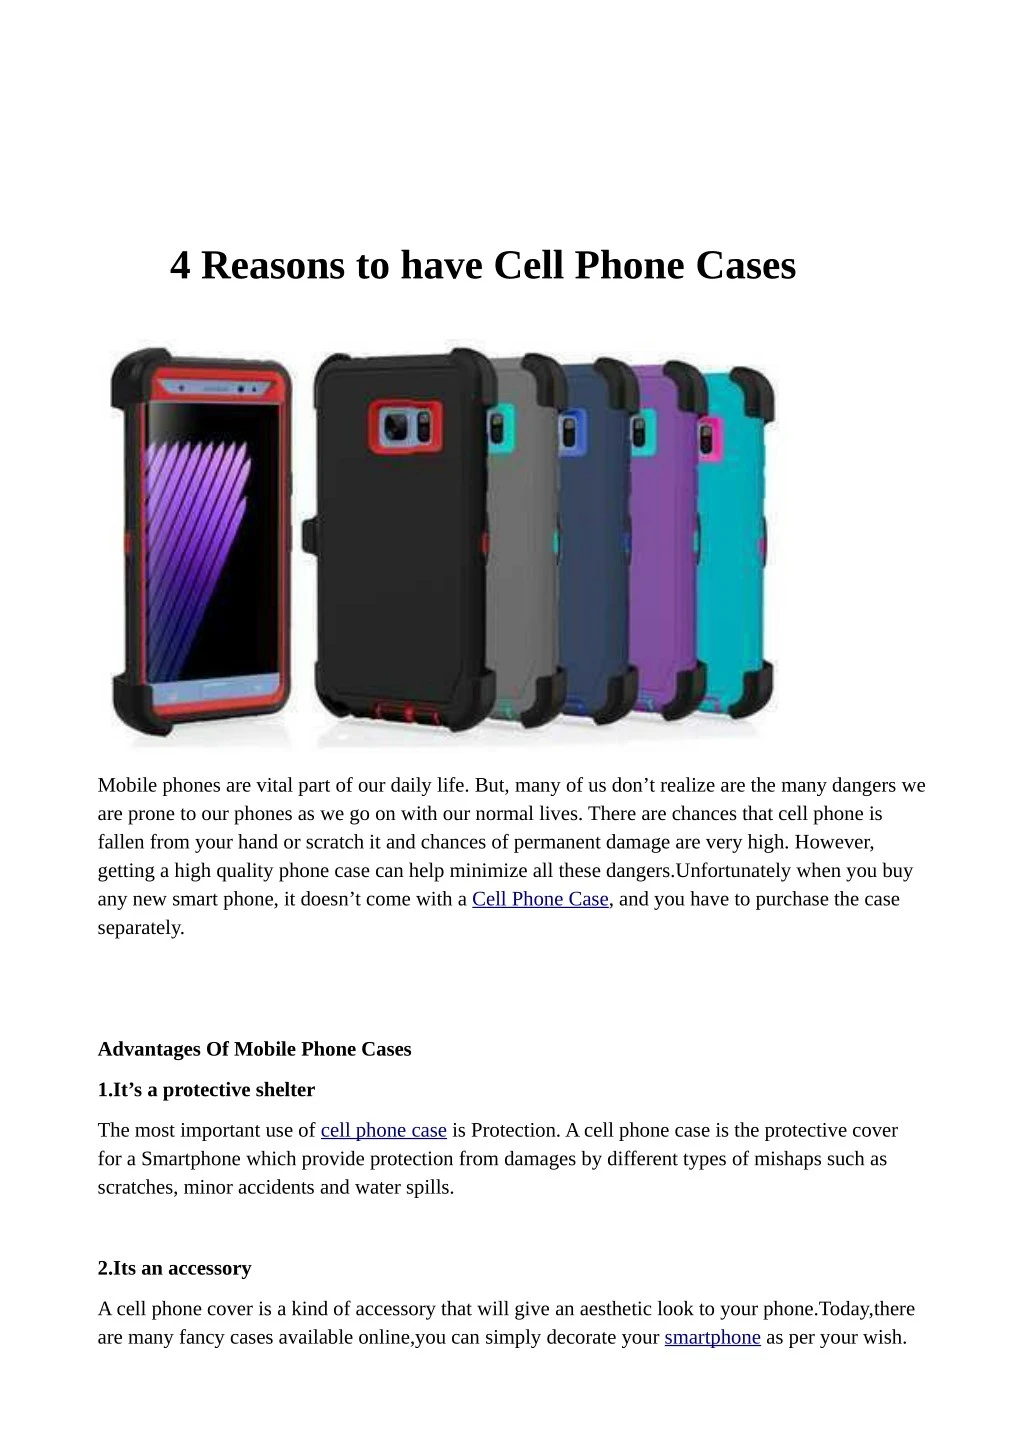 4 reasons to have cell phone cases